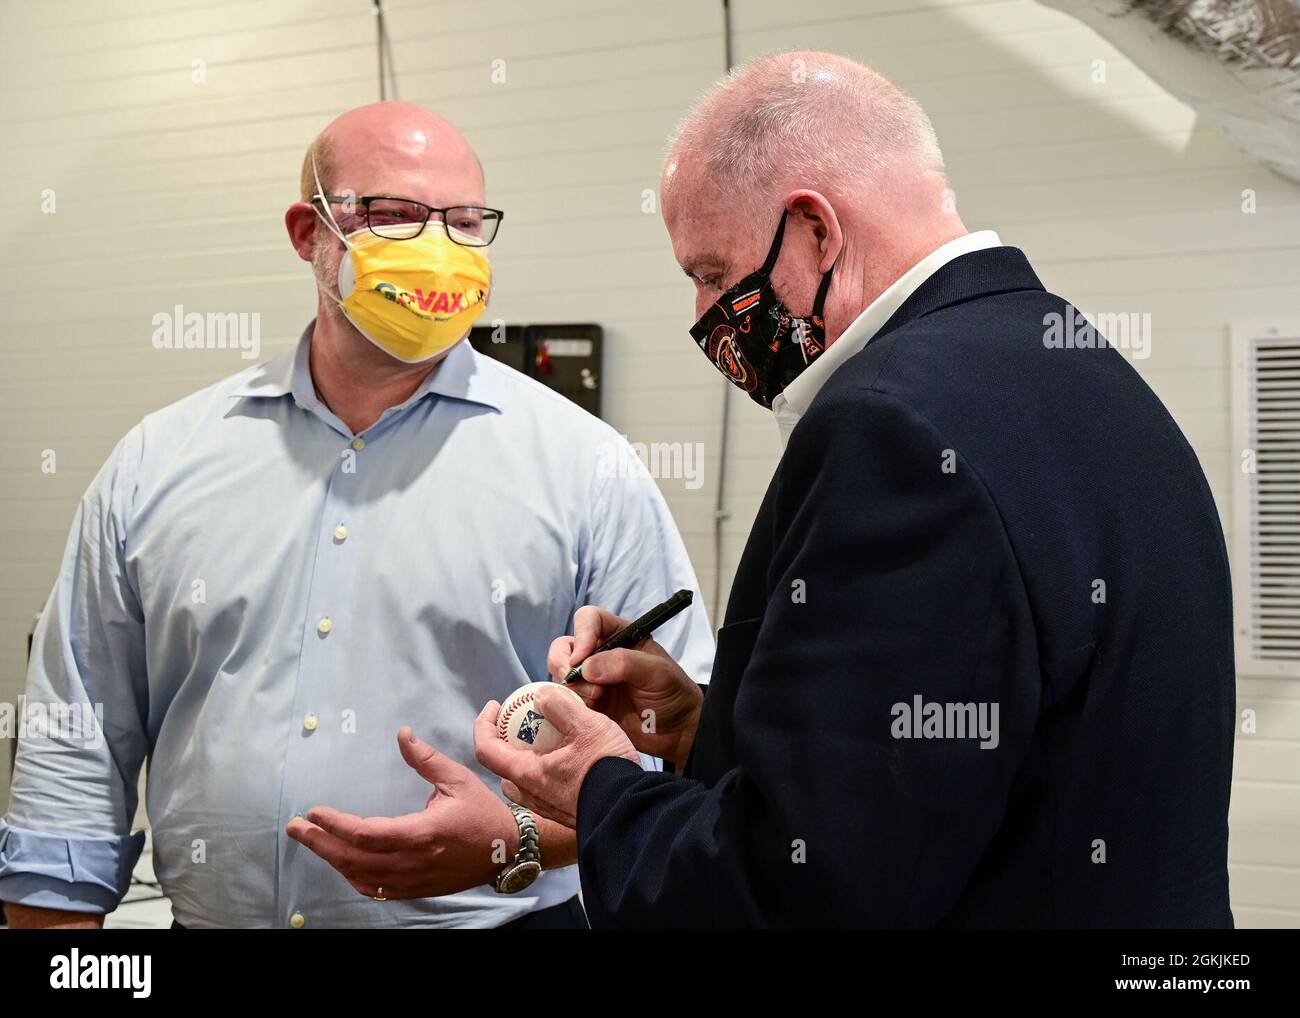 Maryland Governor Larry Hogan signs a baseball for a member of the medical team  during a visit to the Ripken Stadium vaccination site on May 5, 2021, in Aberdeen, Maryland. The site offers drive-up vaccinations to assist citizens in Harford County with increased vaccination options. Stock Photo